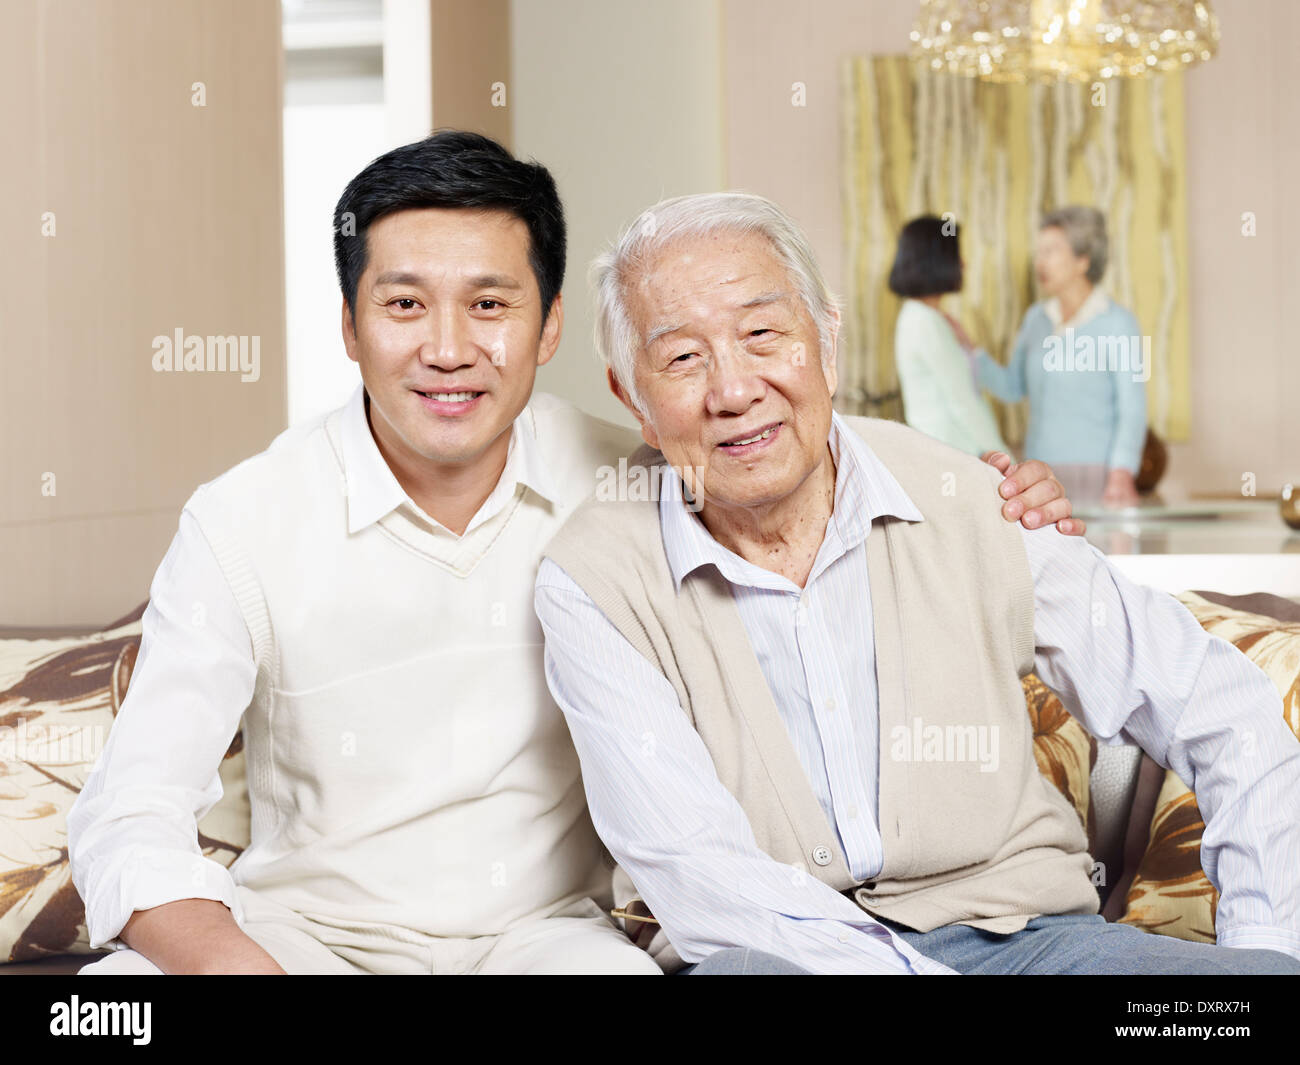 senior father and adult son Stock Photo